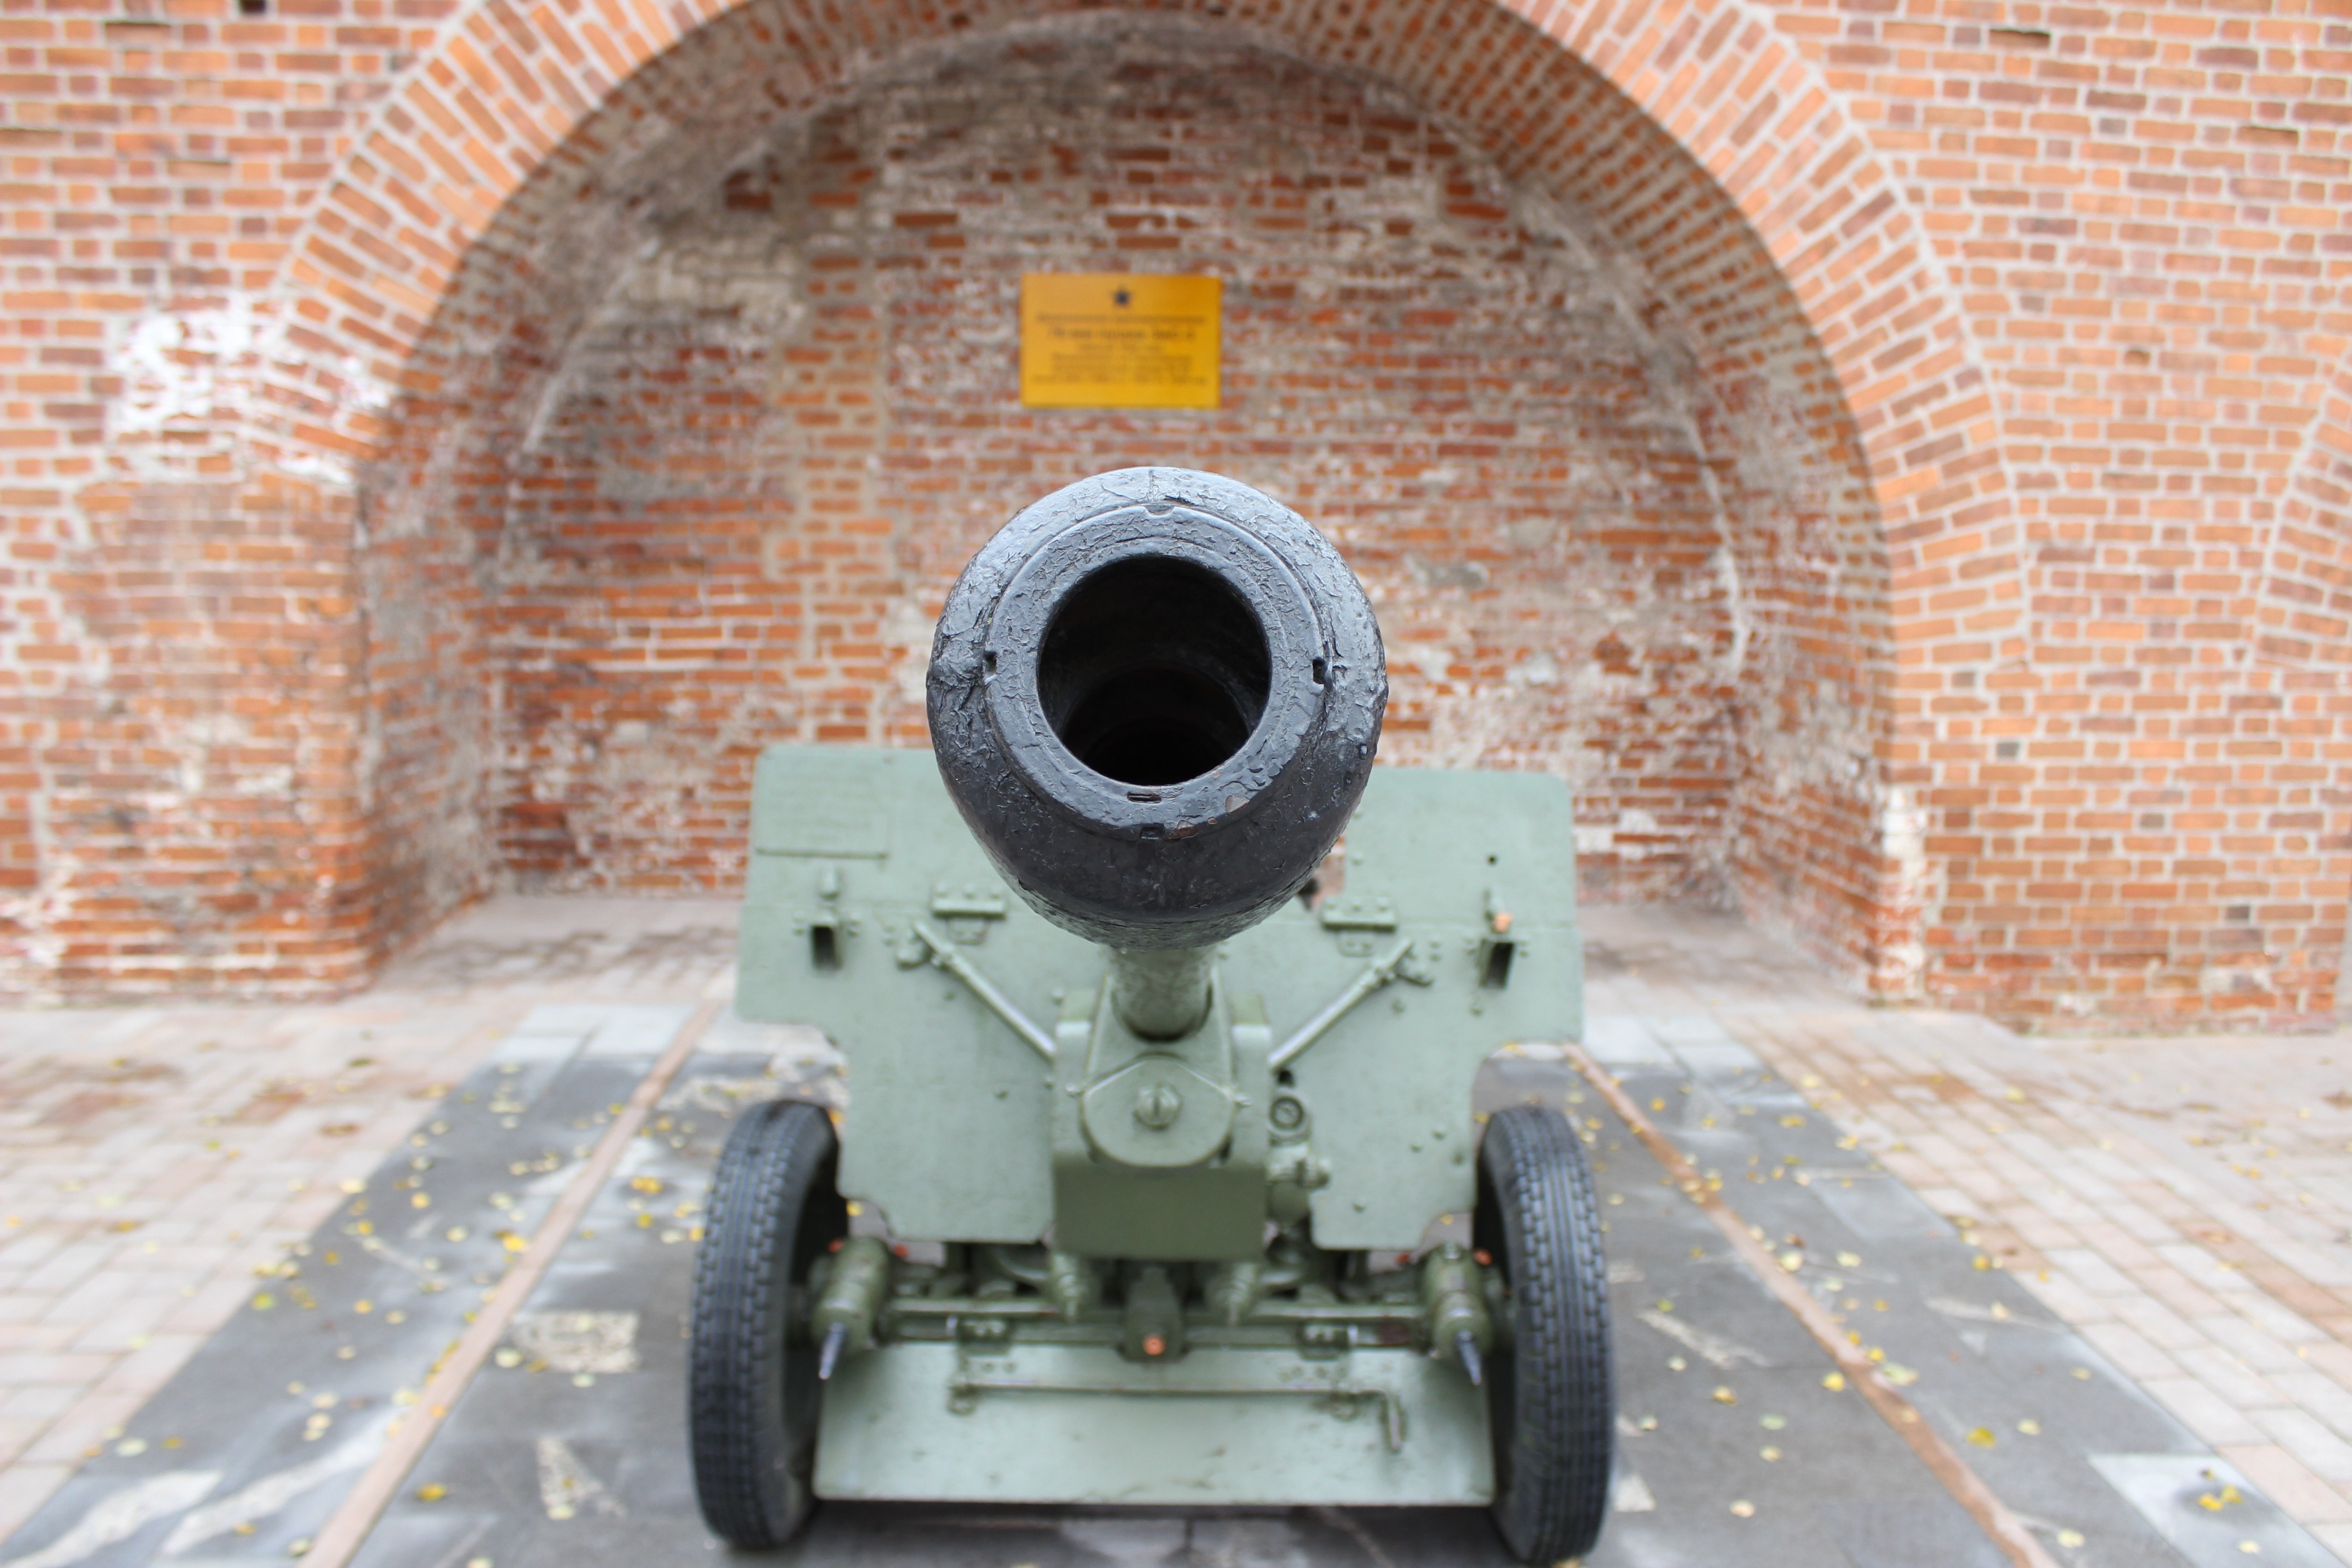 green and black cannon near brown brick walled building